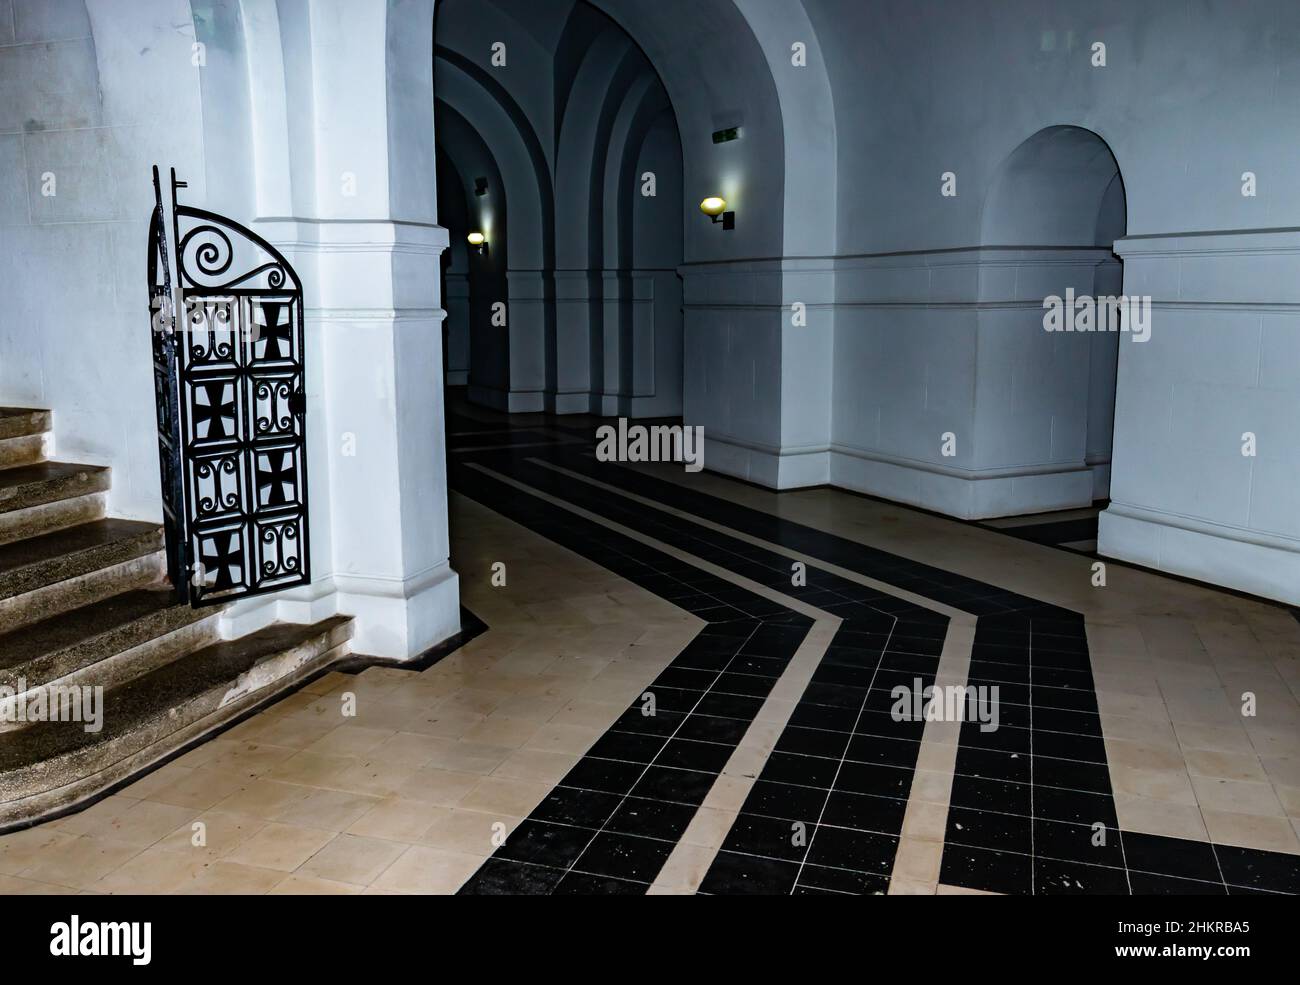 Vrancea, Romania - May 2, 2021: dark photograph inside the mausoleum in Marasesti where the empty and cold halls of the building can be seen Stock Photo